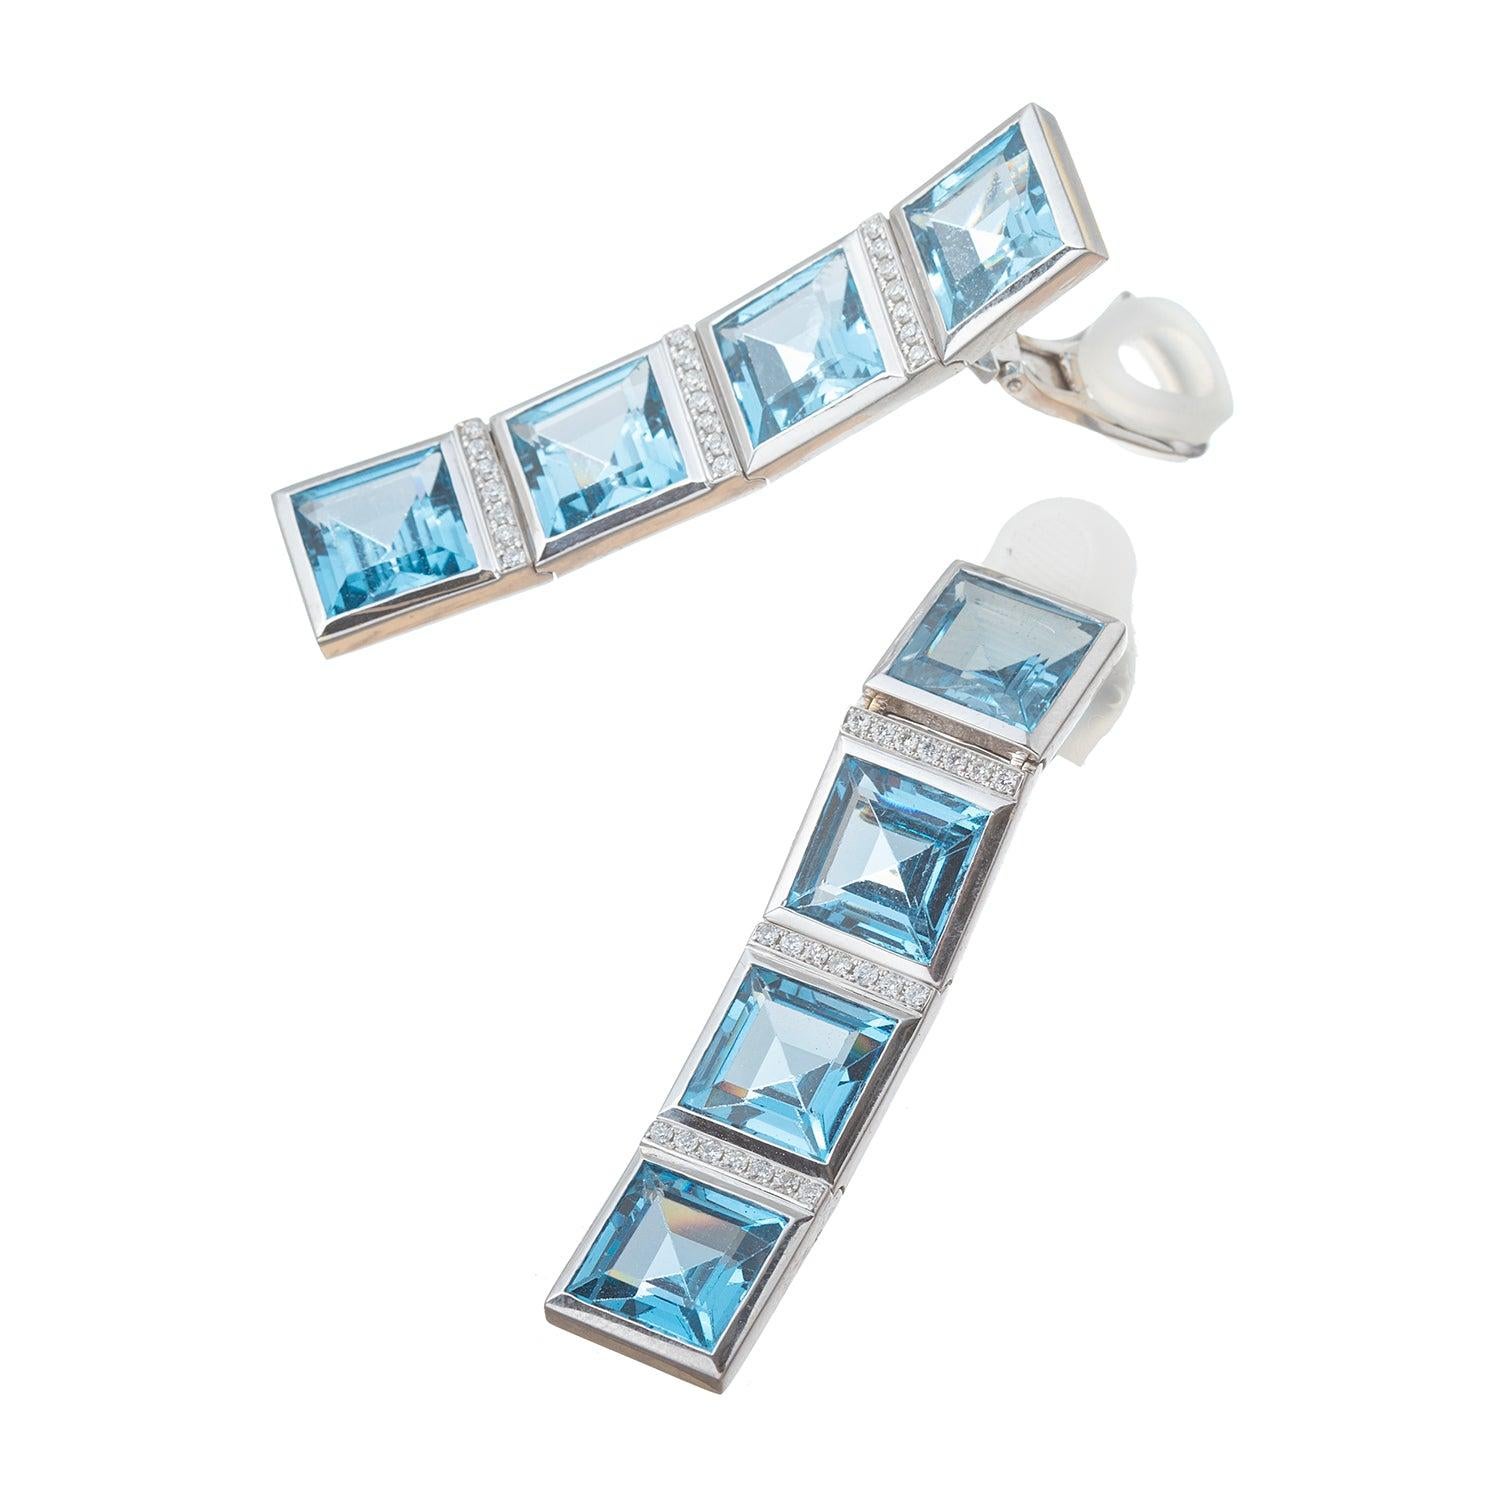 Drop earrings in 18k white gold, each featuring four square-cut blue topaz separated by rows of round-cut diamonds.  Clip backs (posts may be added upon customer request).  2.25